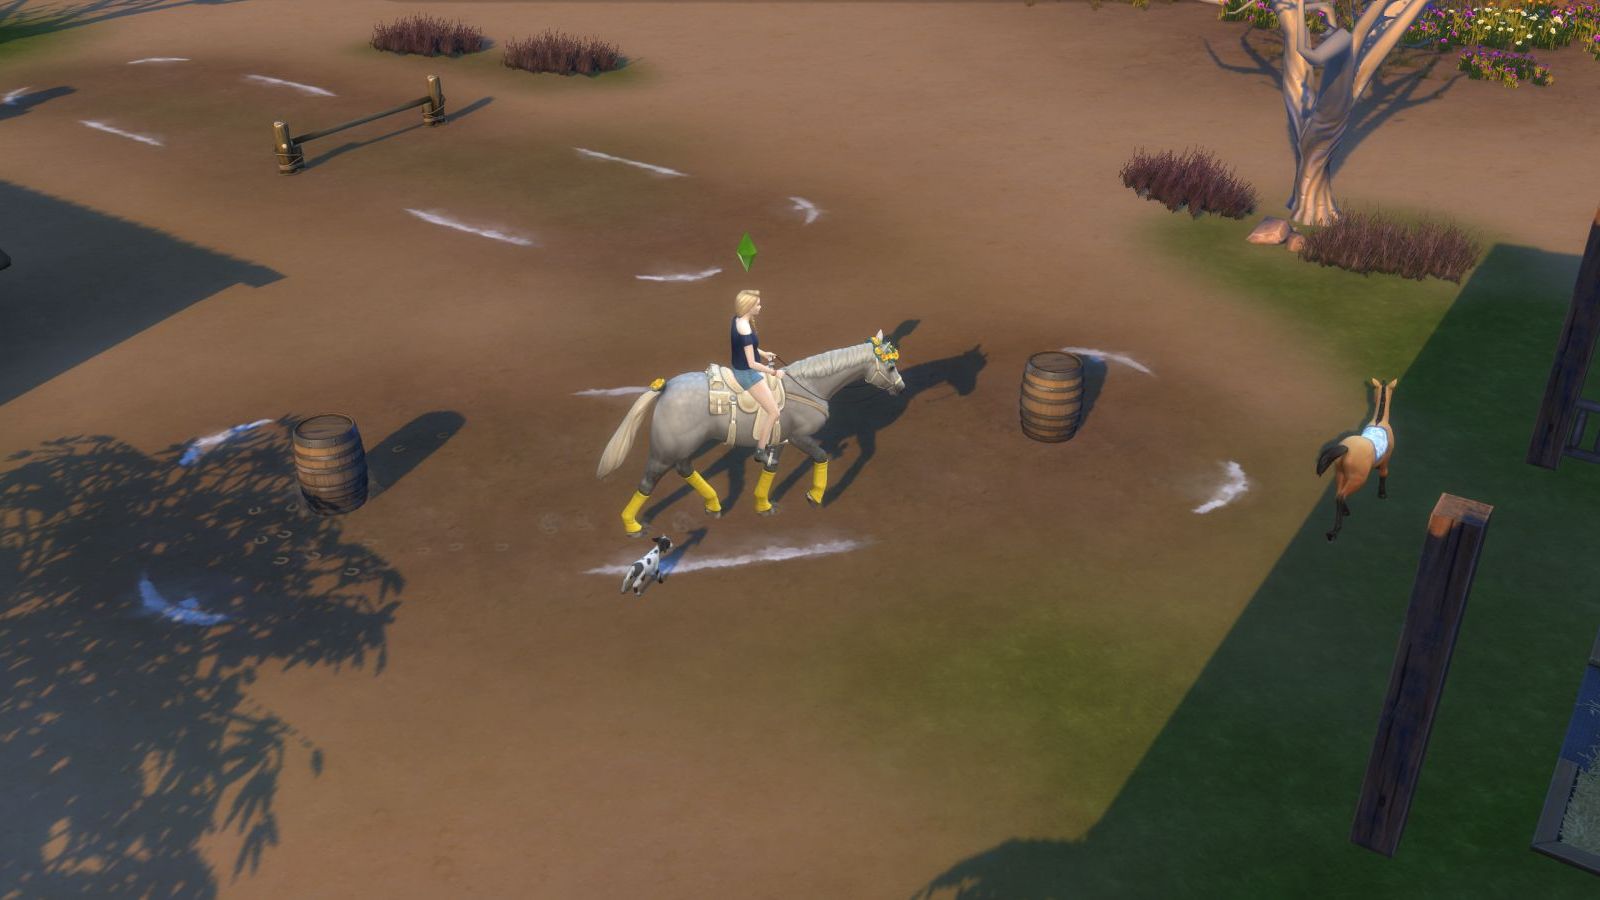 The Sims 4 Horse Ranch Review: A Smooth Ride (PC) - KeenGamer